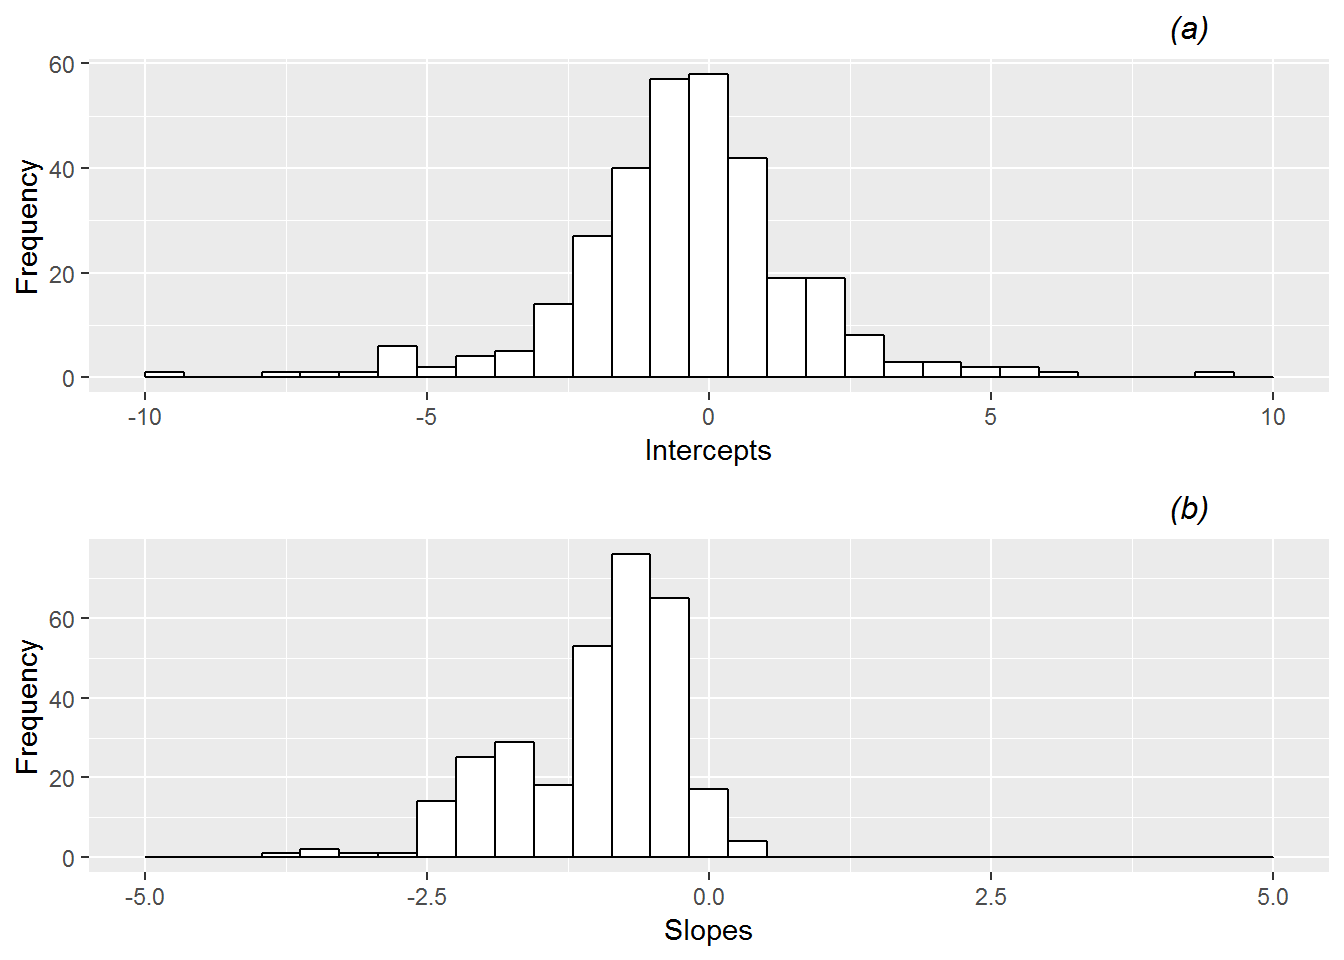 Histograms of (a) intercepts and (b) slopes from fitting simple logistic regression models by game.  Several extreme outliers have been cut off in these plots for illustration purposes.